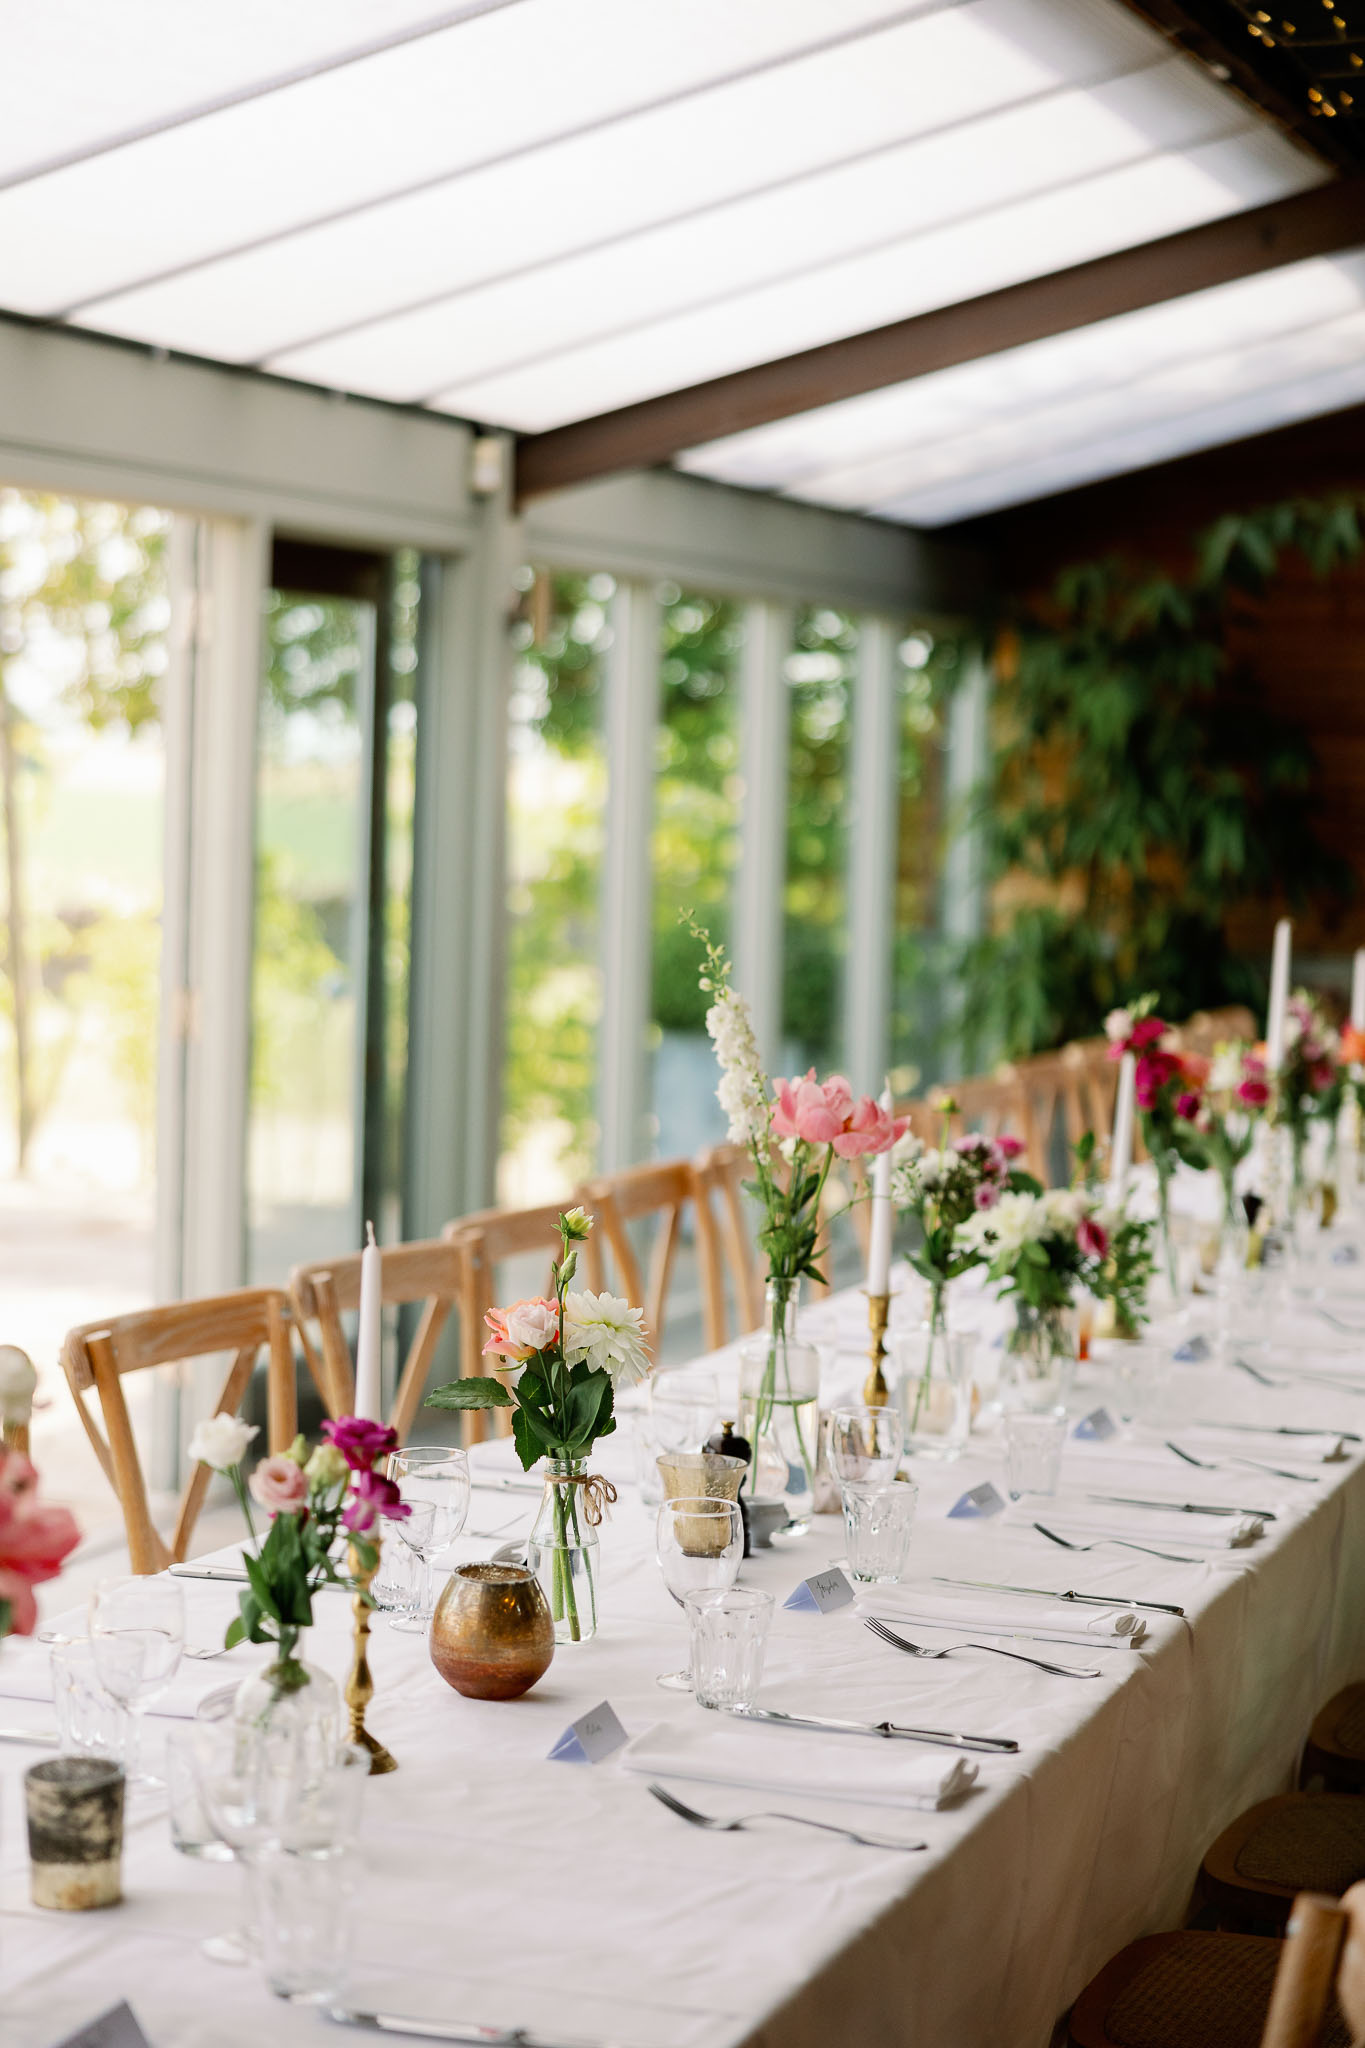 Stone Barn Decorated for a Summer Wedding